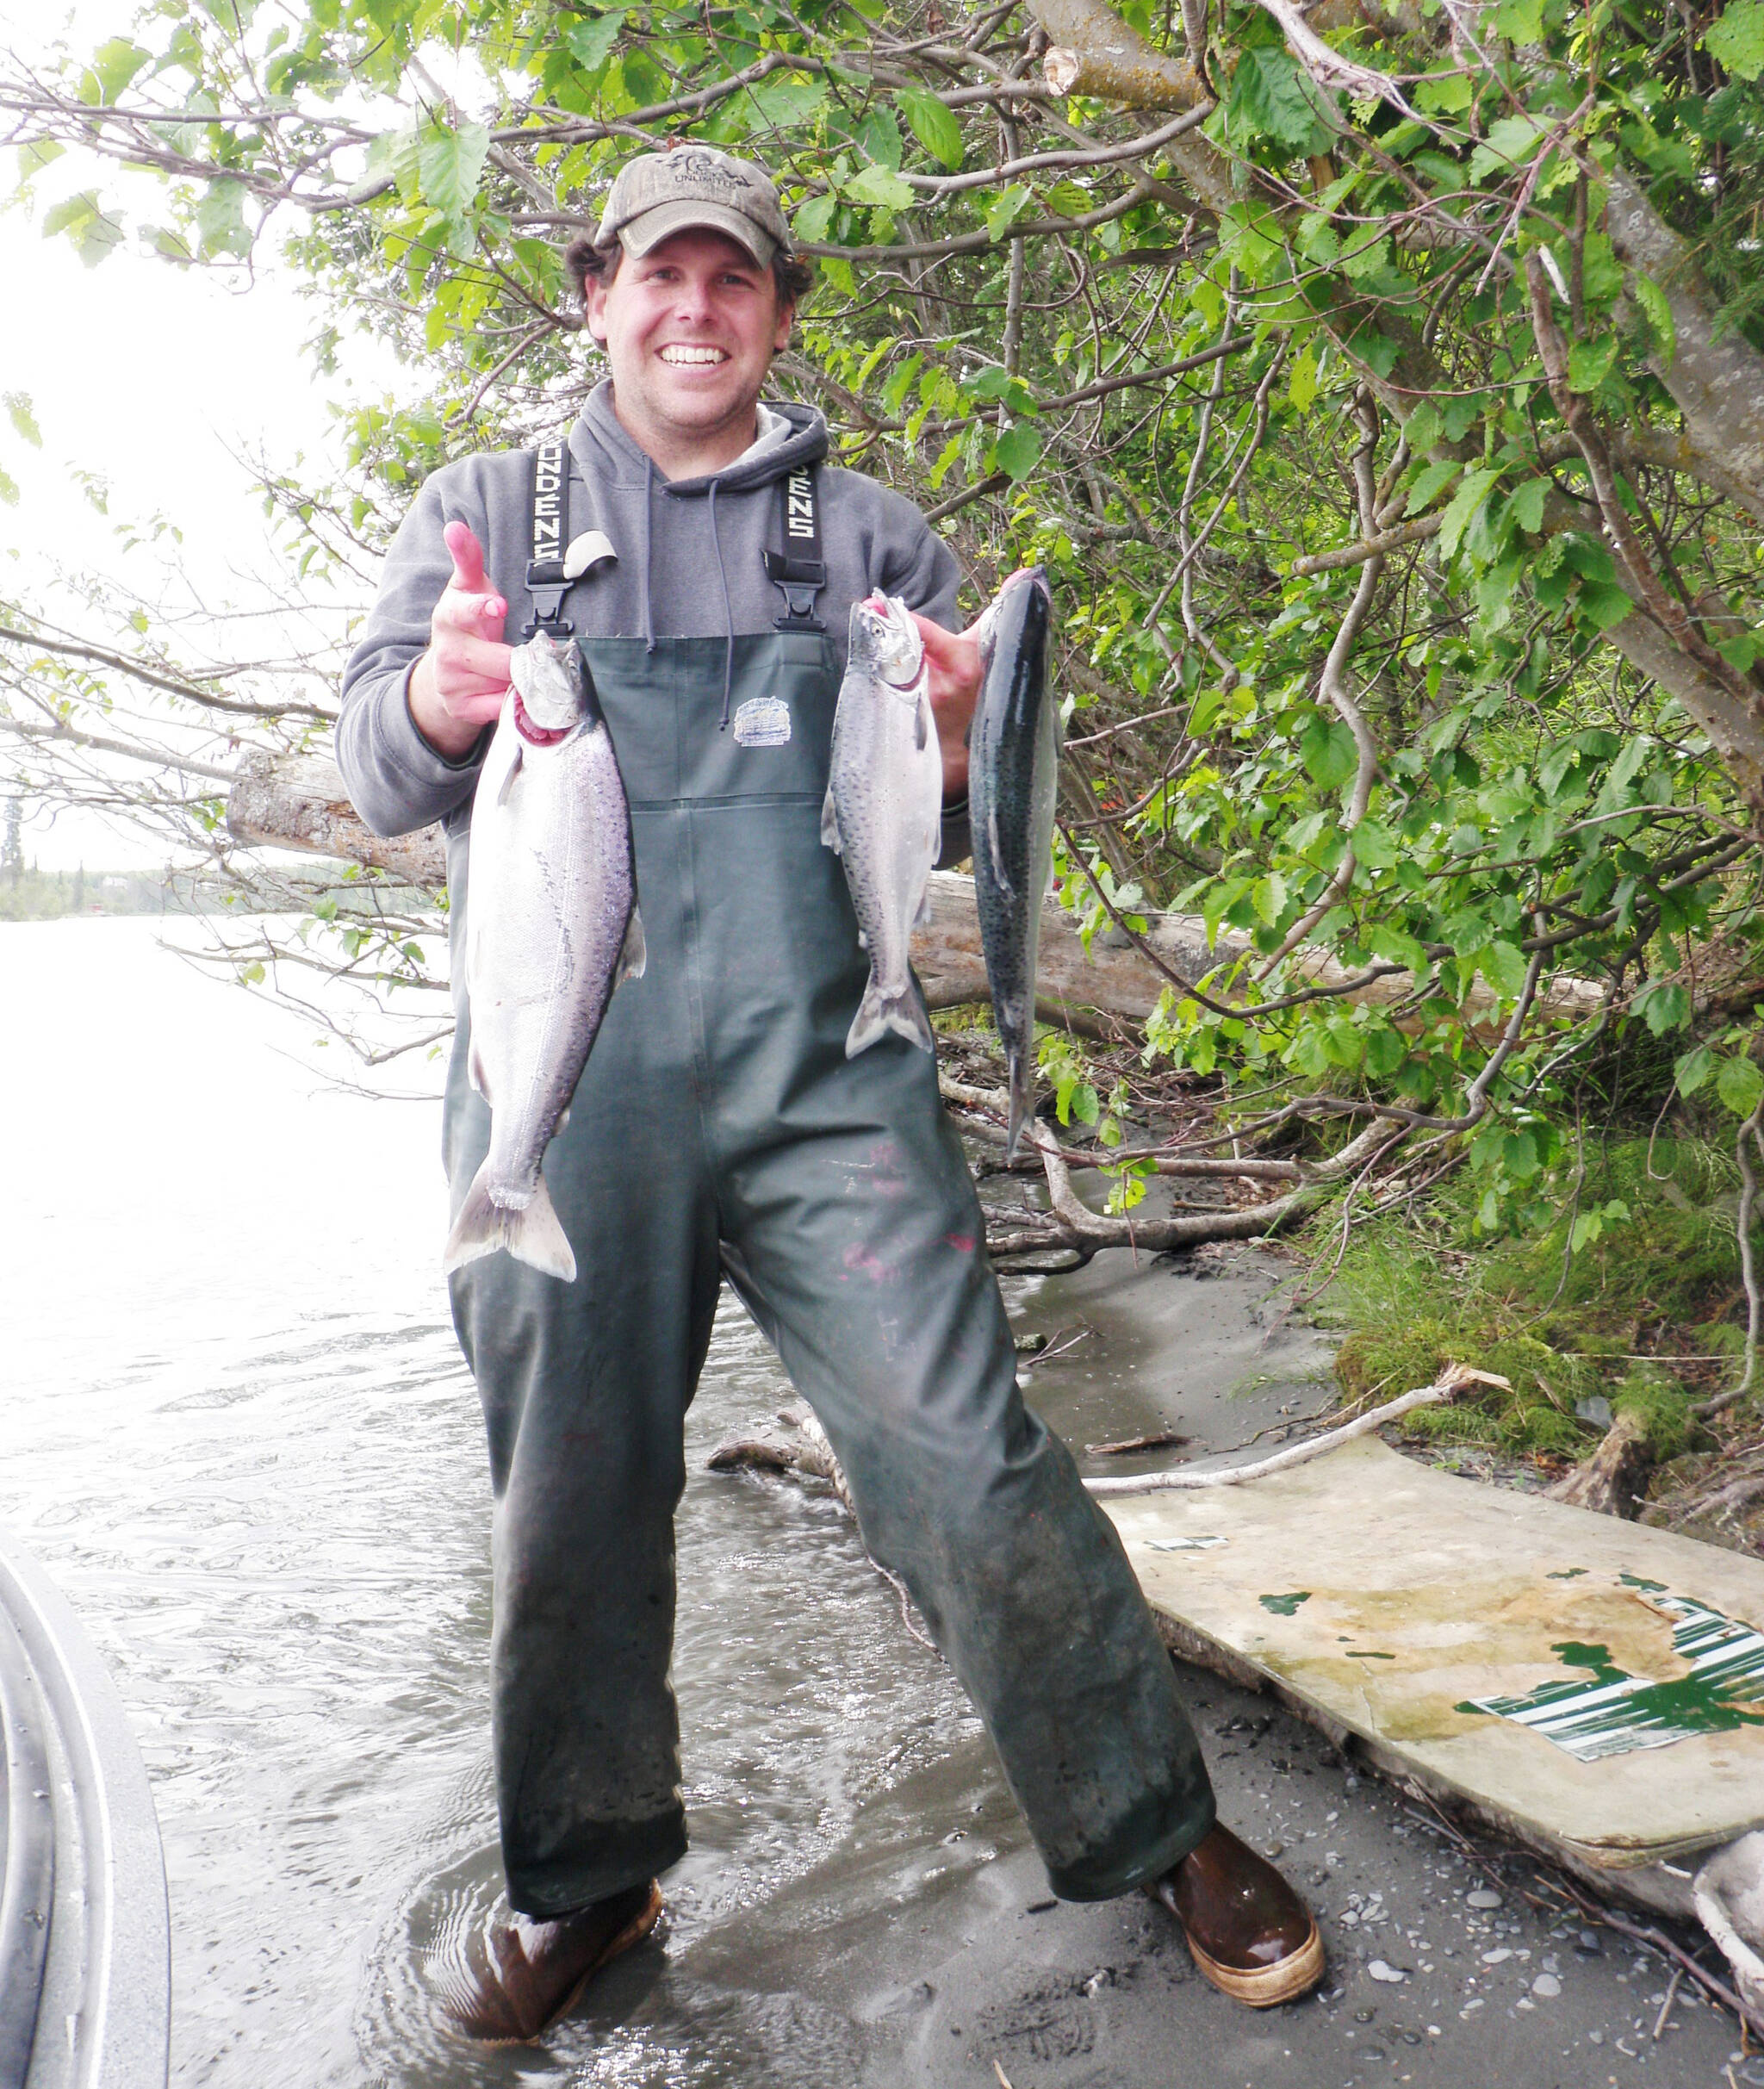 Photo by Ken Gates 
Some great examples of genetic diversity with Kenai River king salmon populations.